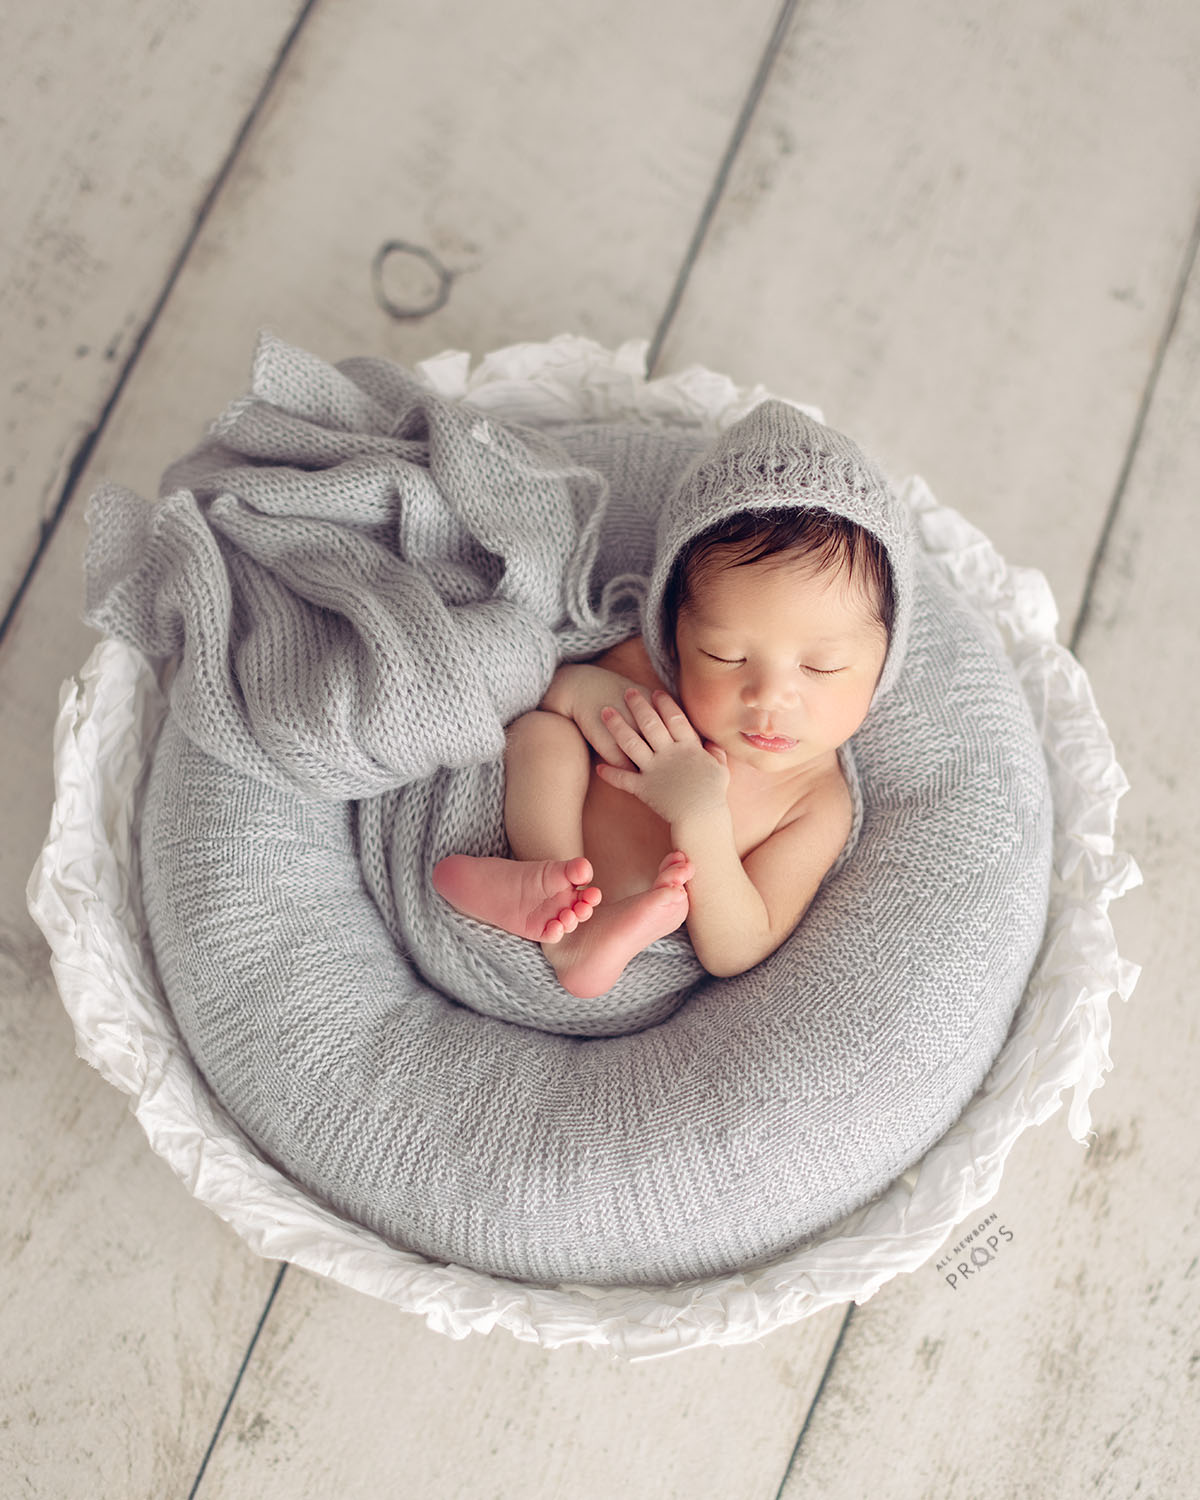 Sibling Newborn Poses Tips and Tricks: How to safely pose newborns with  their siblings - Your San Diego Maternity Photographer, Newborn  Photographer and Family Photographer